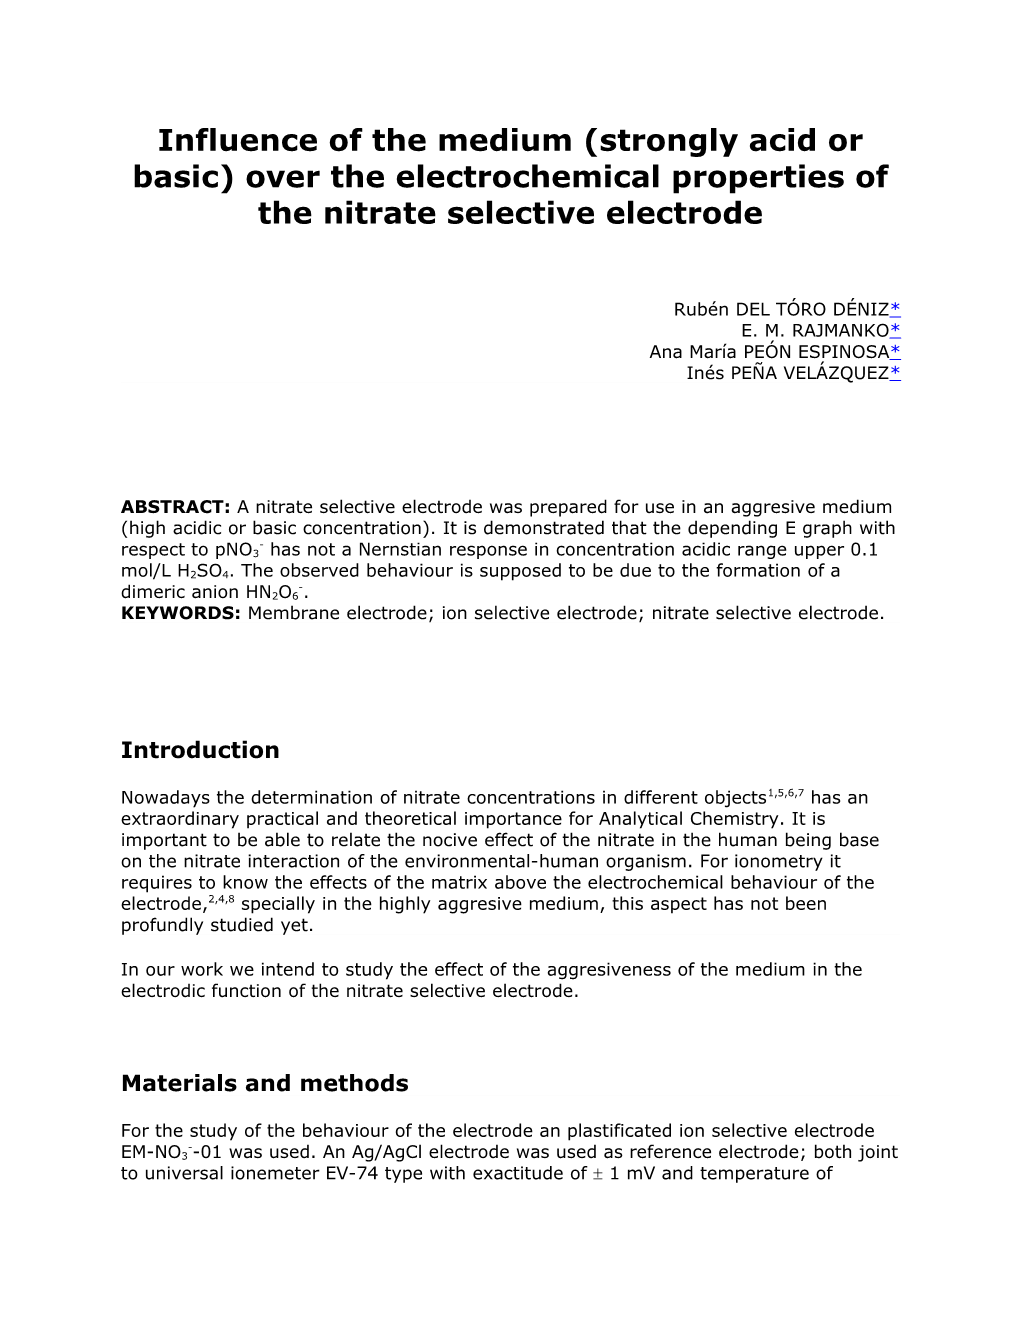 Influence of the Medium (Strongly Acid Or Basic) Over the Electrochemical Properties Of